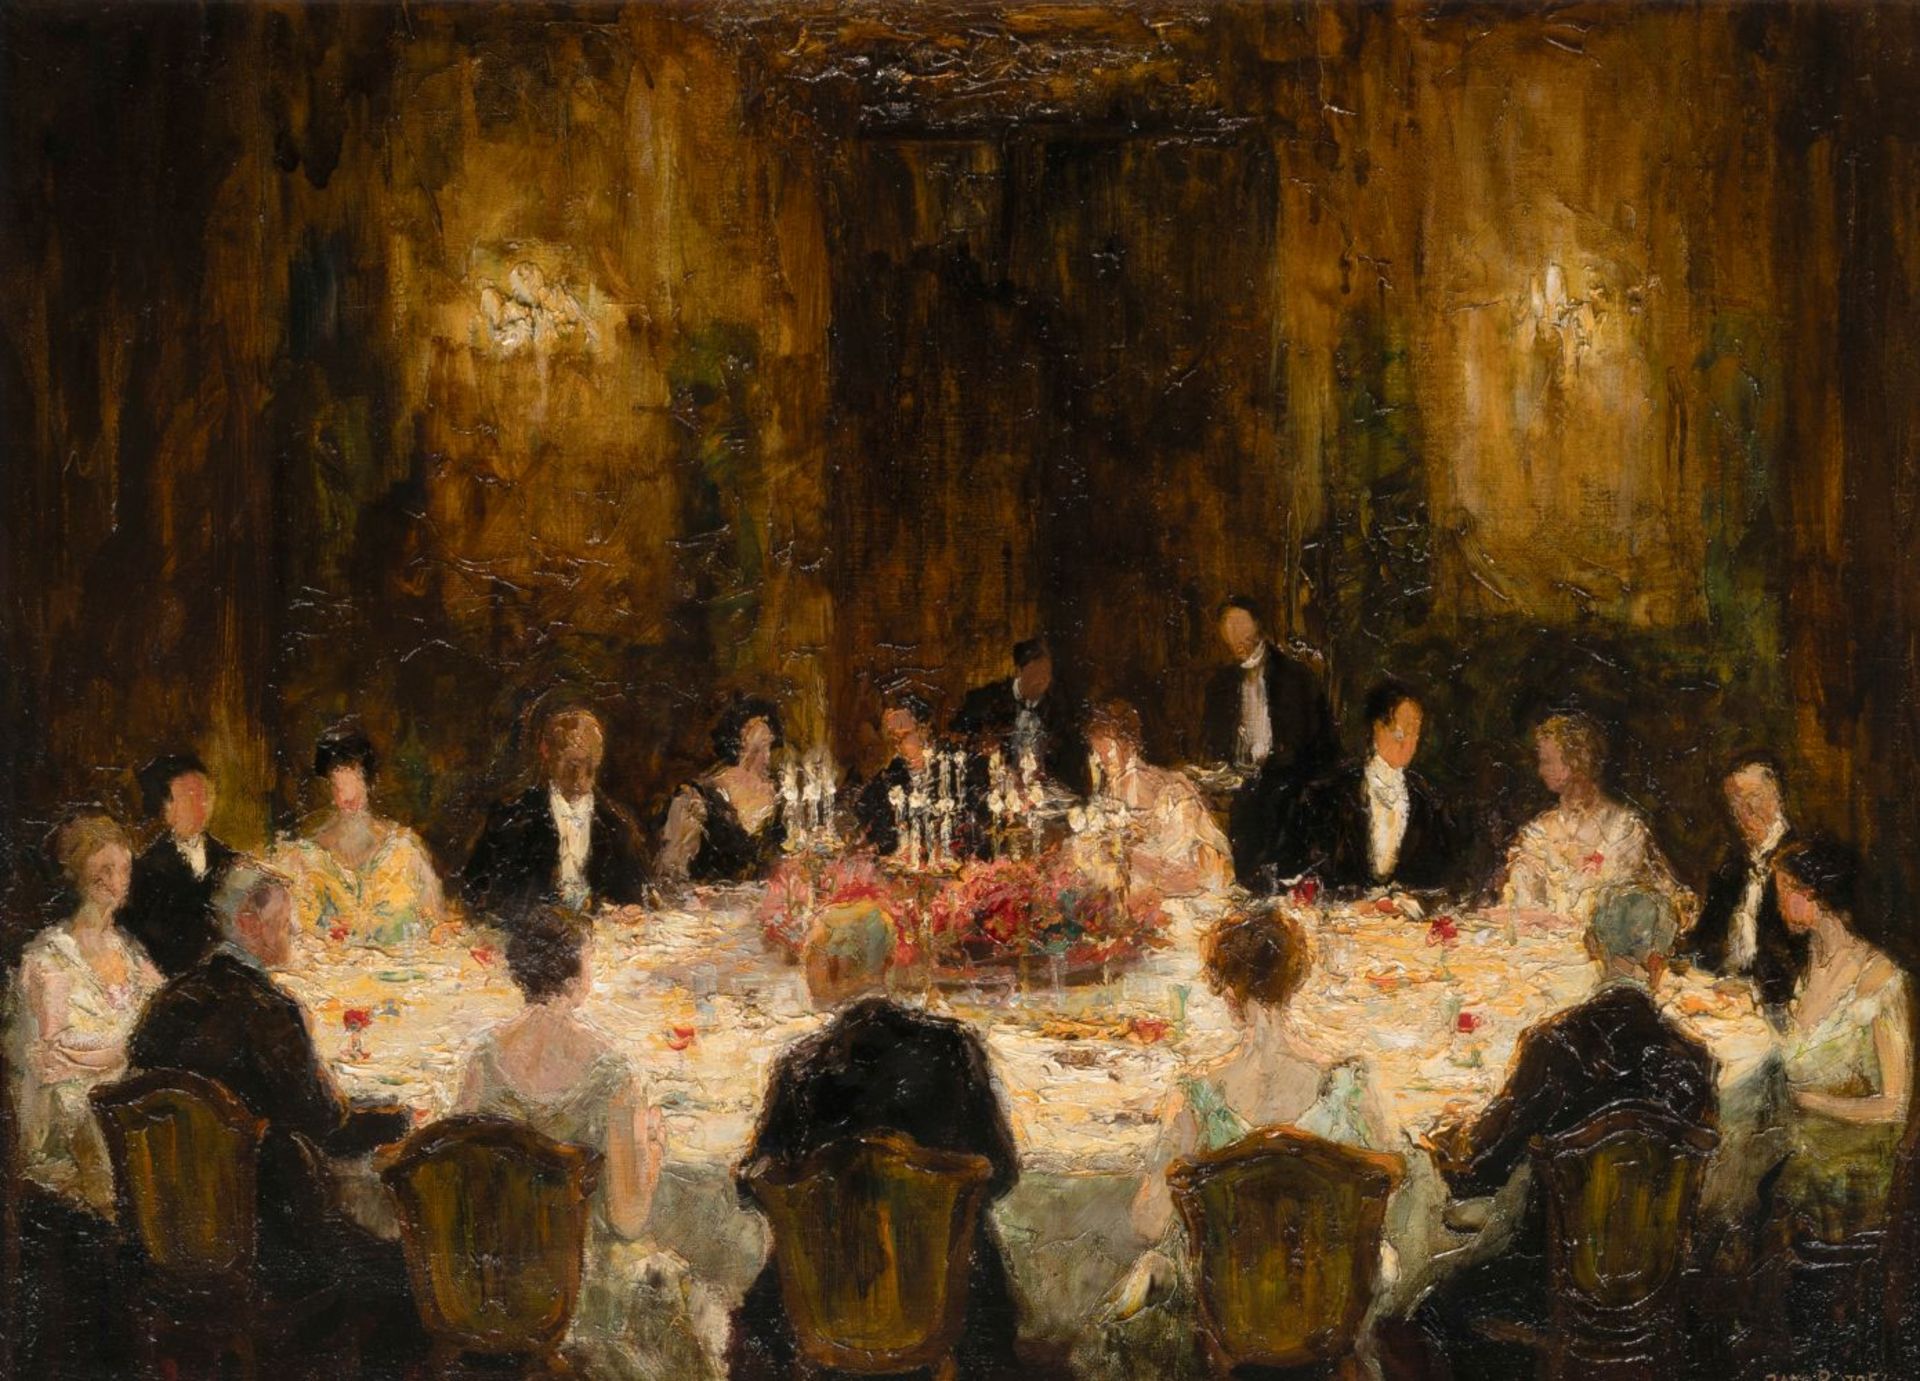 Pippel, Otto (Lodz 1878 - Planegg 1960). Dinner Party.